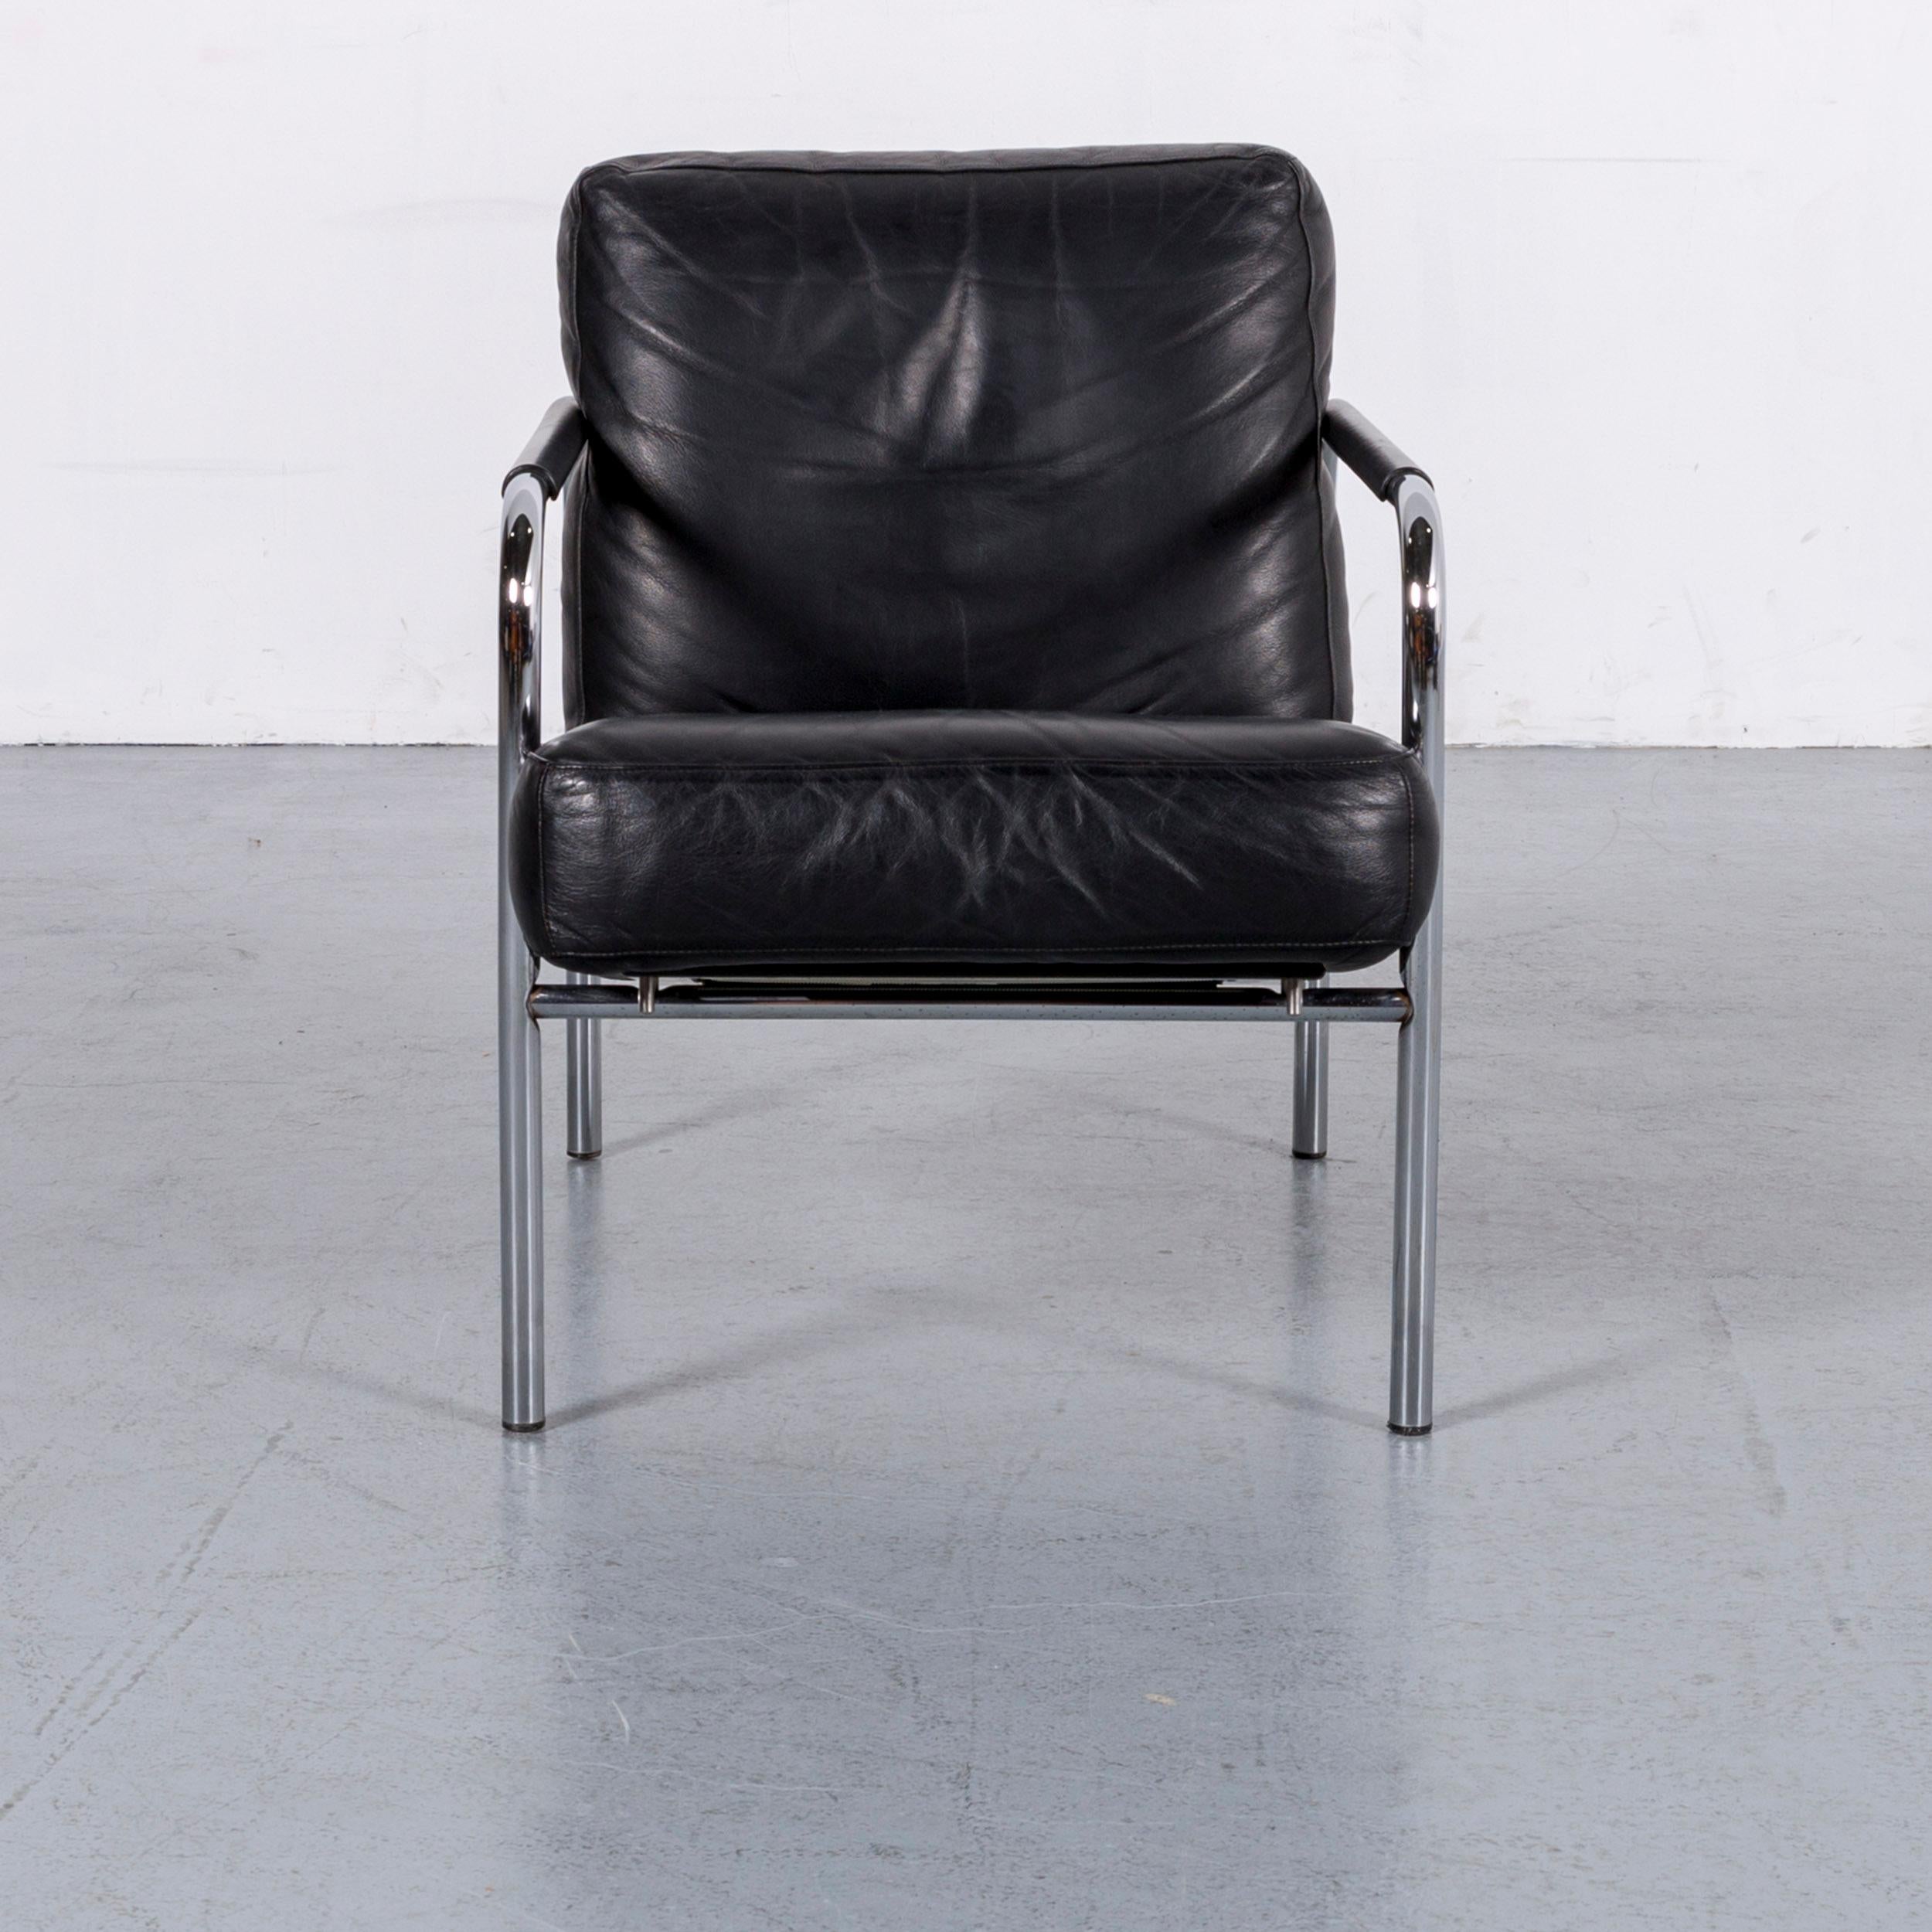 We bring to you an Zanotta Susanna leather armchair black one-seat chair.































